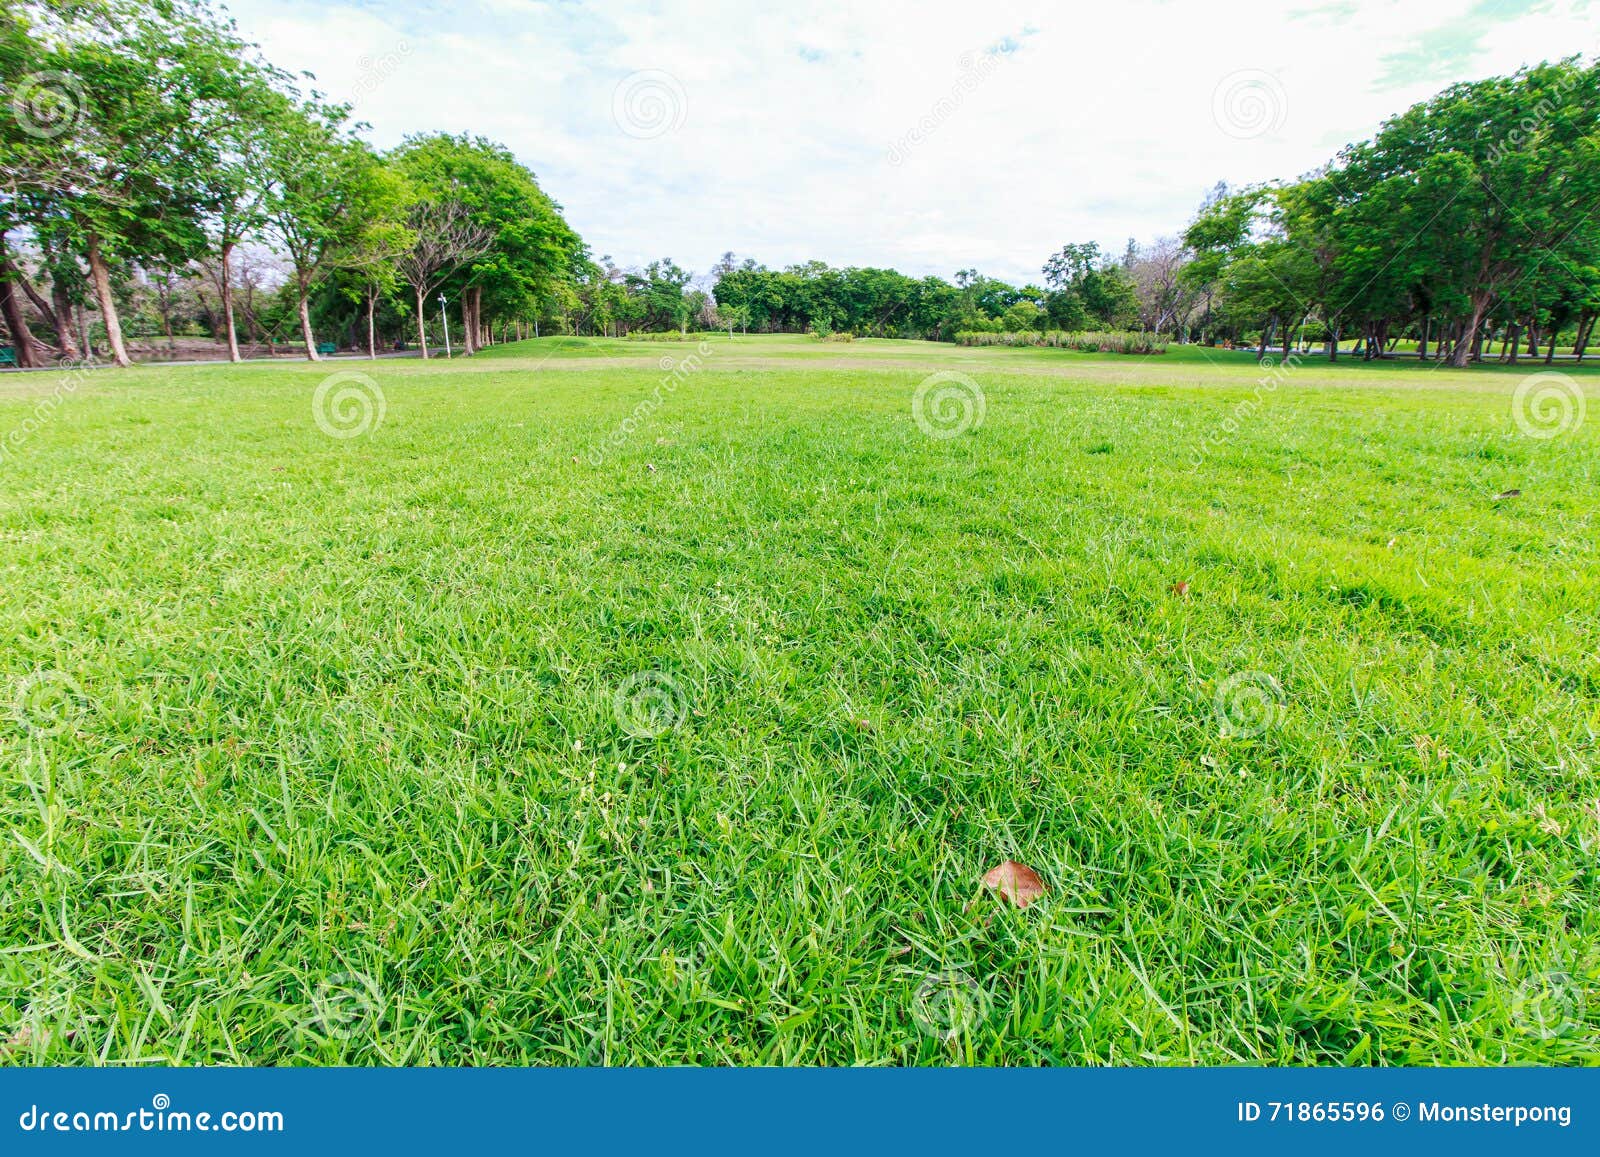 the landscap park and grass in city